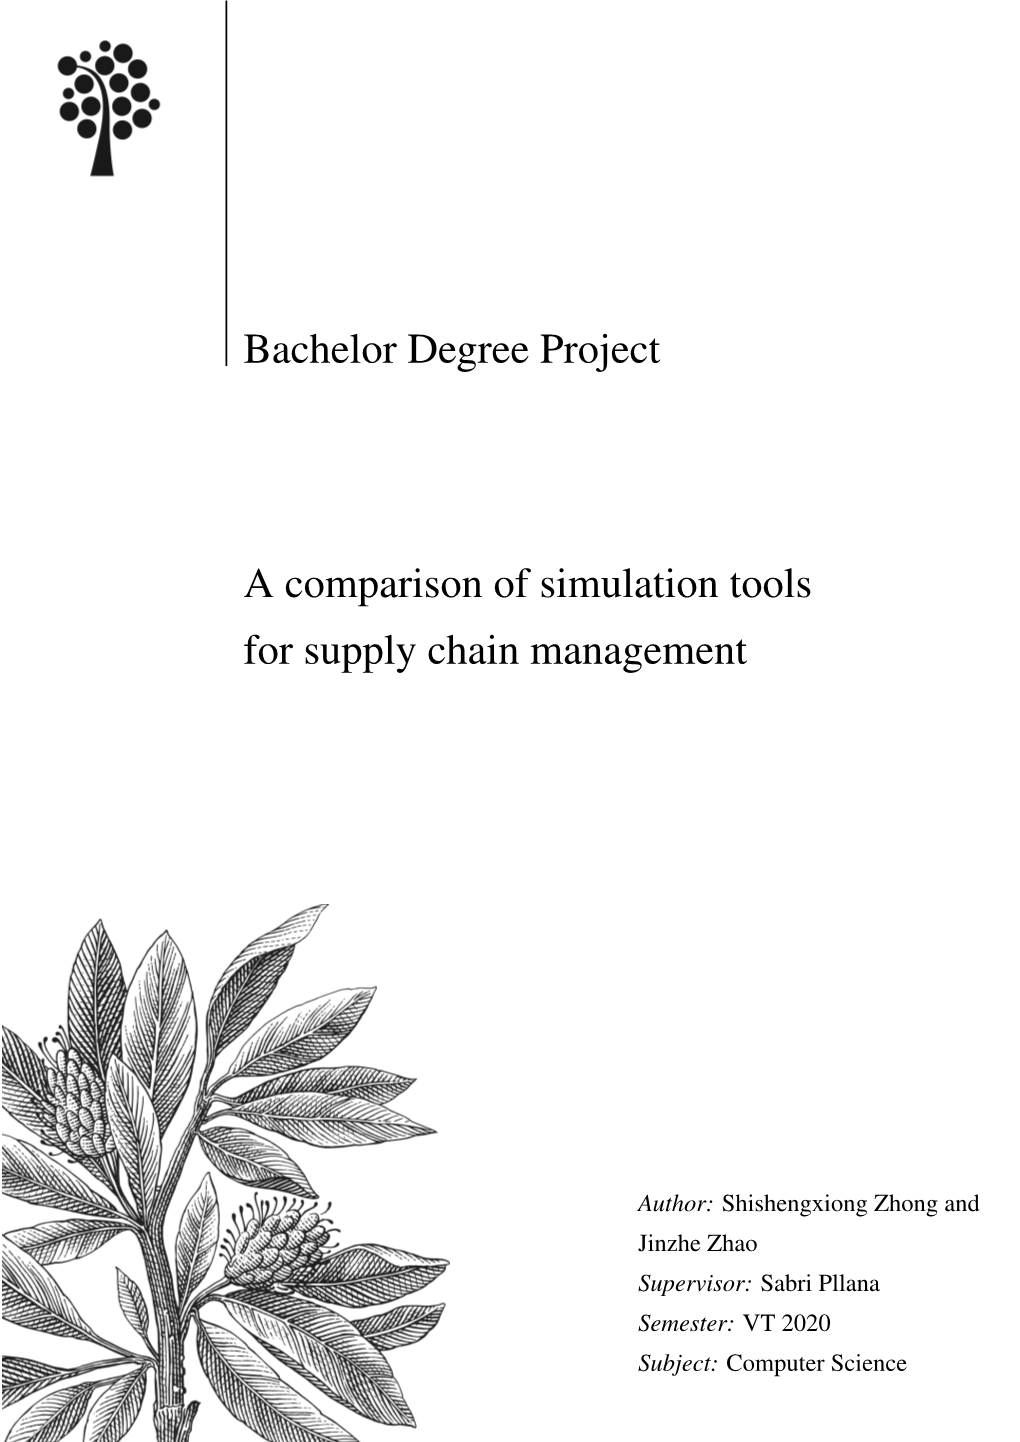 Bachelor Degree Project a Comparison of Simulation Tools For